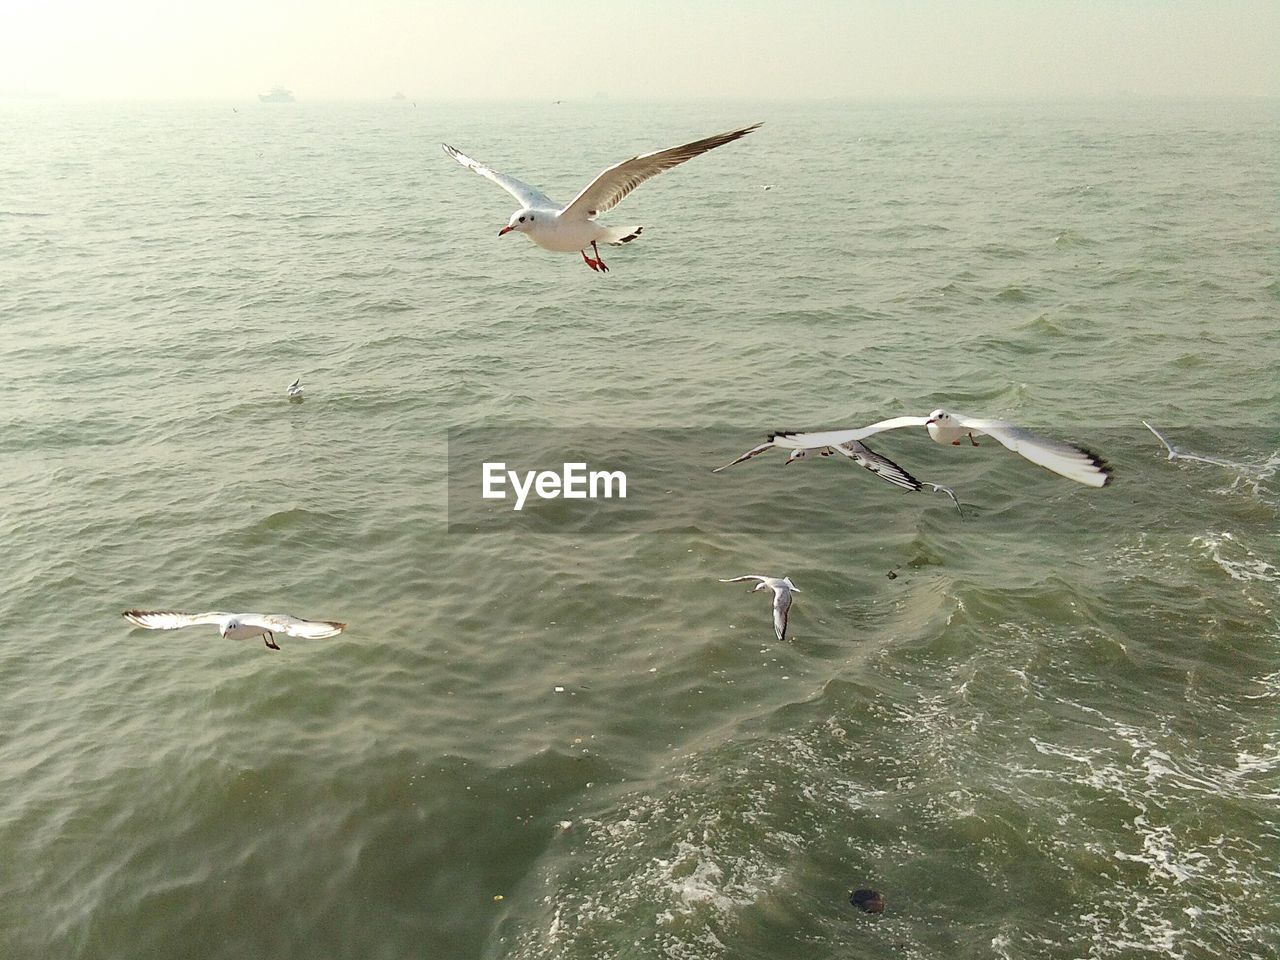 SEAGULLS FLYING ABOVE SEA